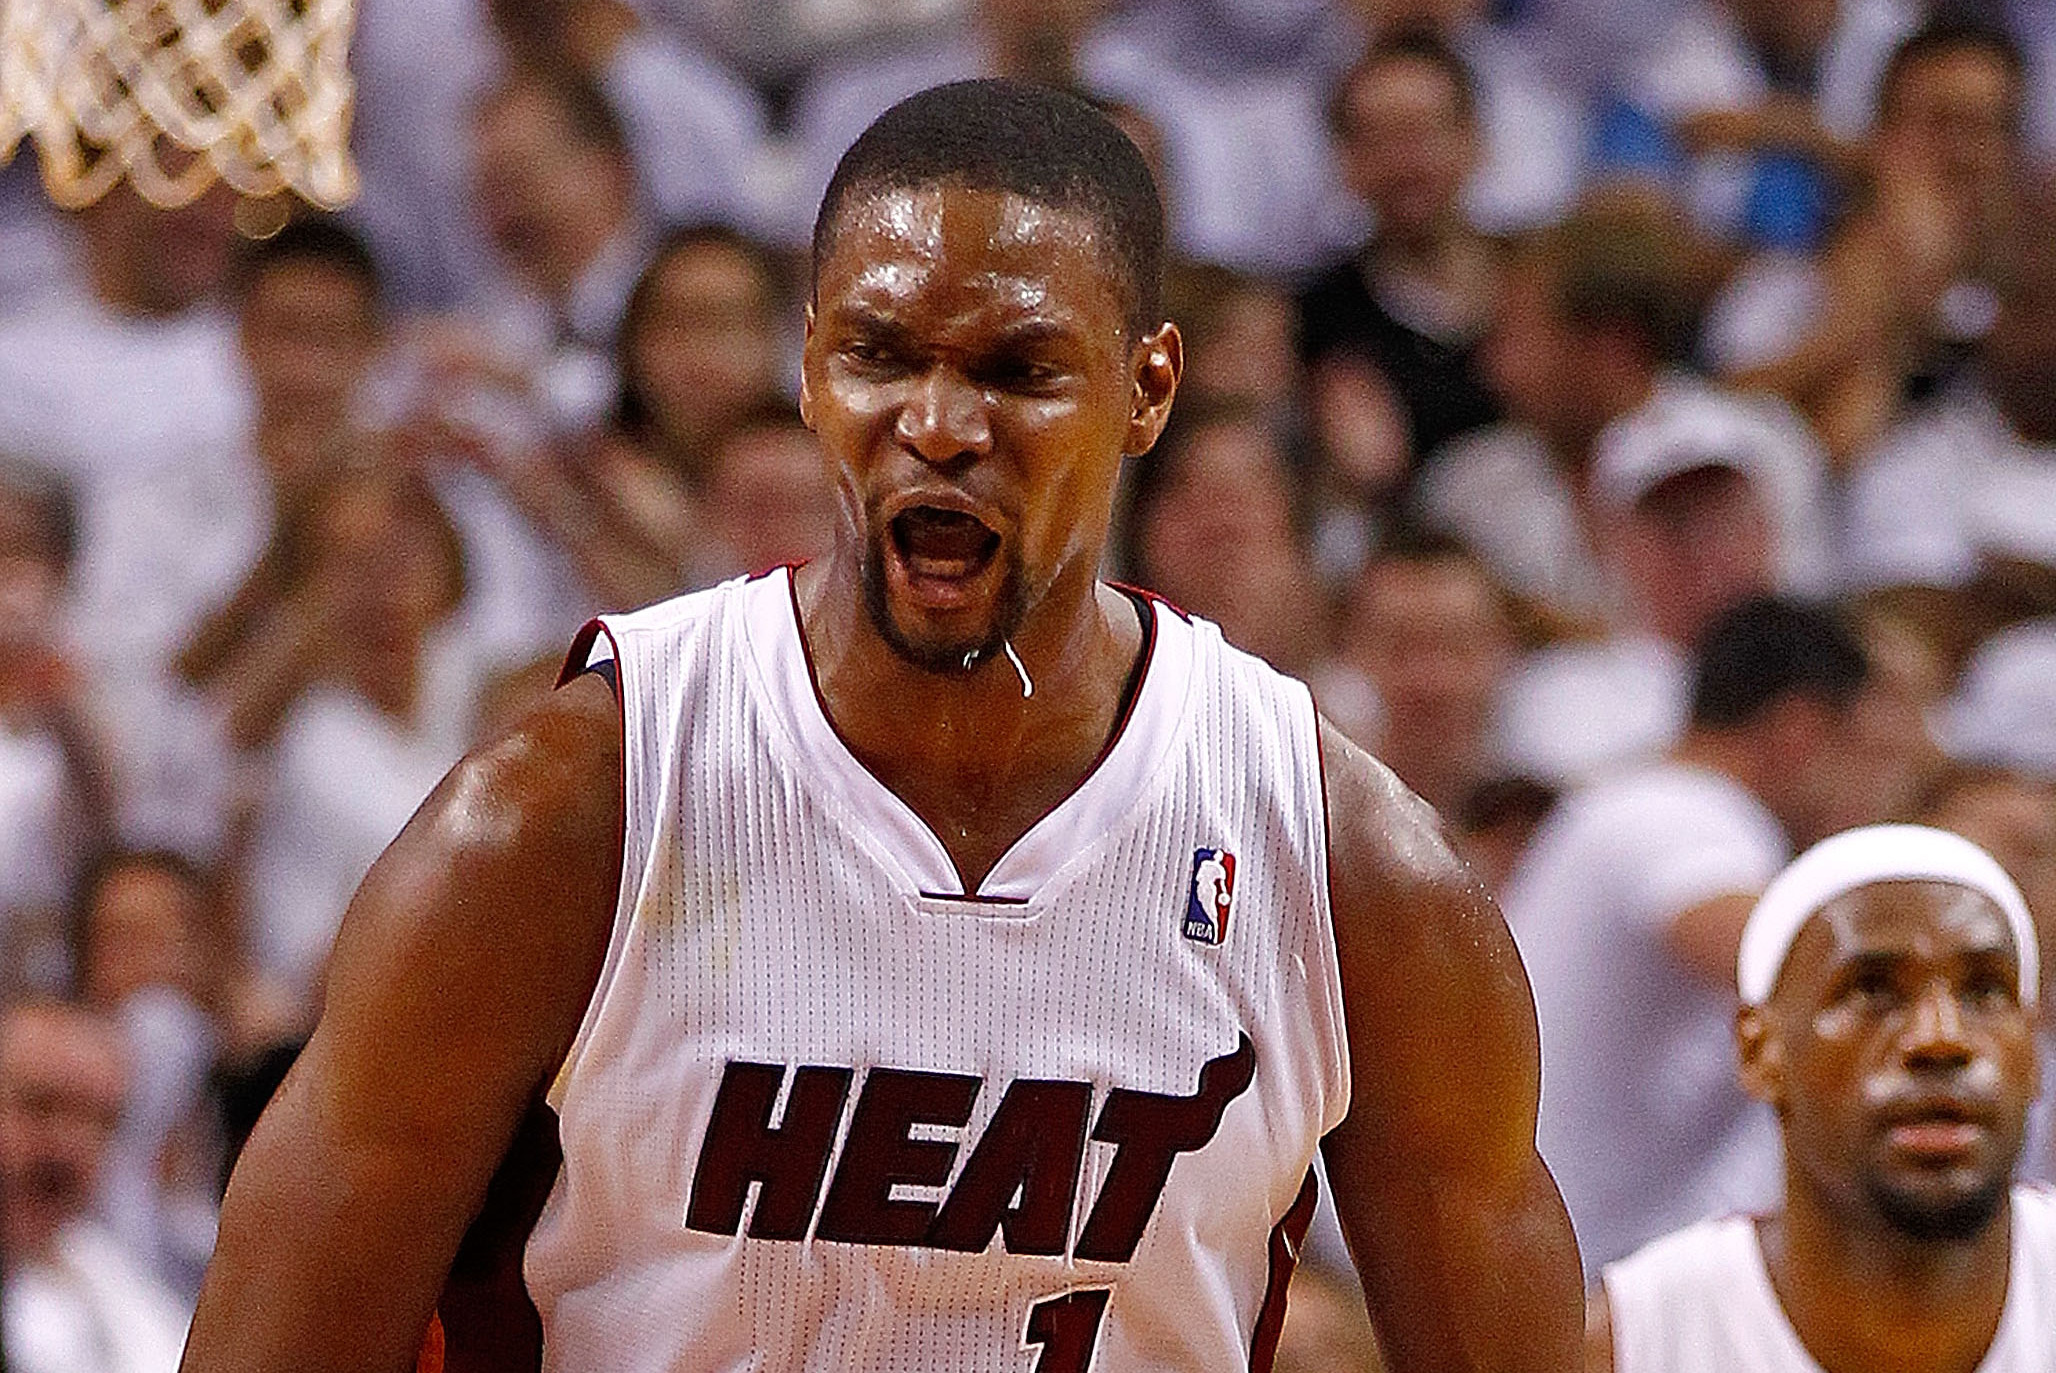 While Chris Bosh still wants an NBA gig, he's trying a new sport